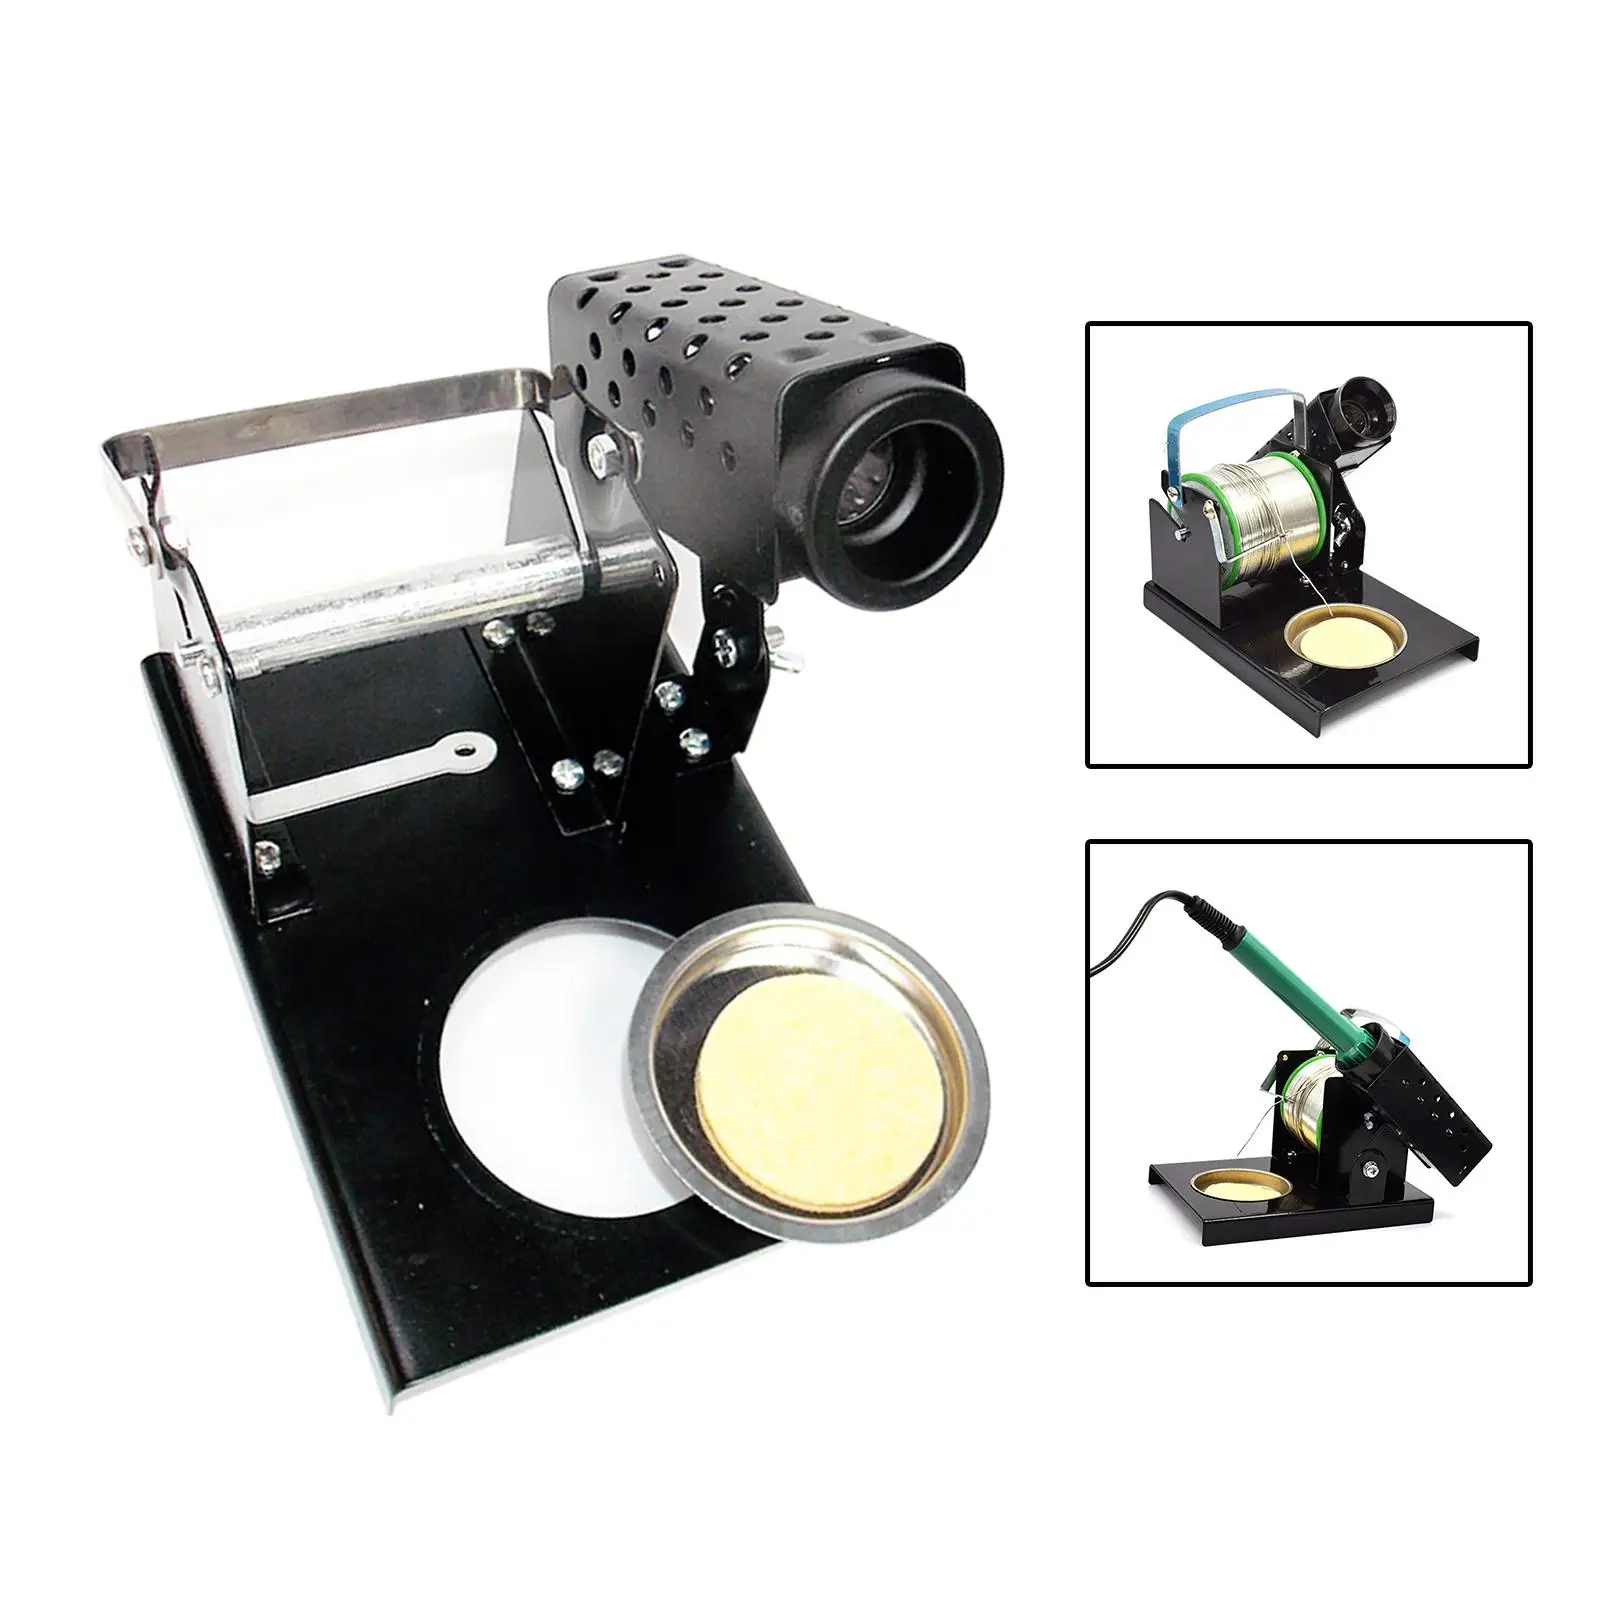 Heavy Duty Soldering Iron Stand Holder Support Station with Tip Cleaning Sponge Welding Accessories High Temperature Resistance